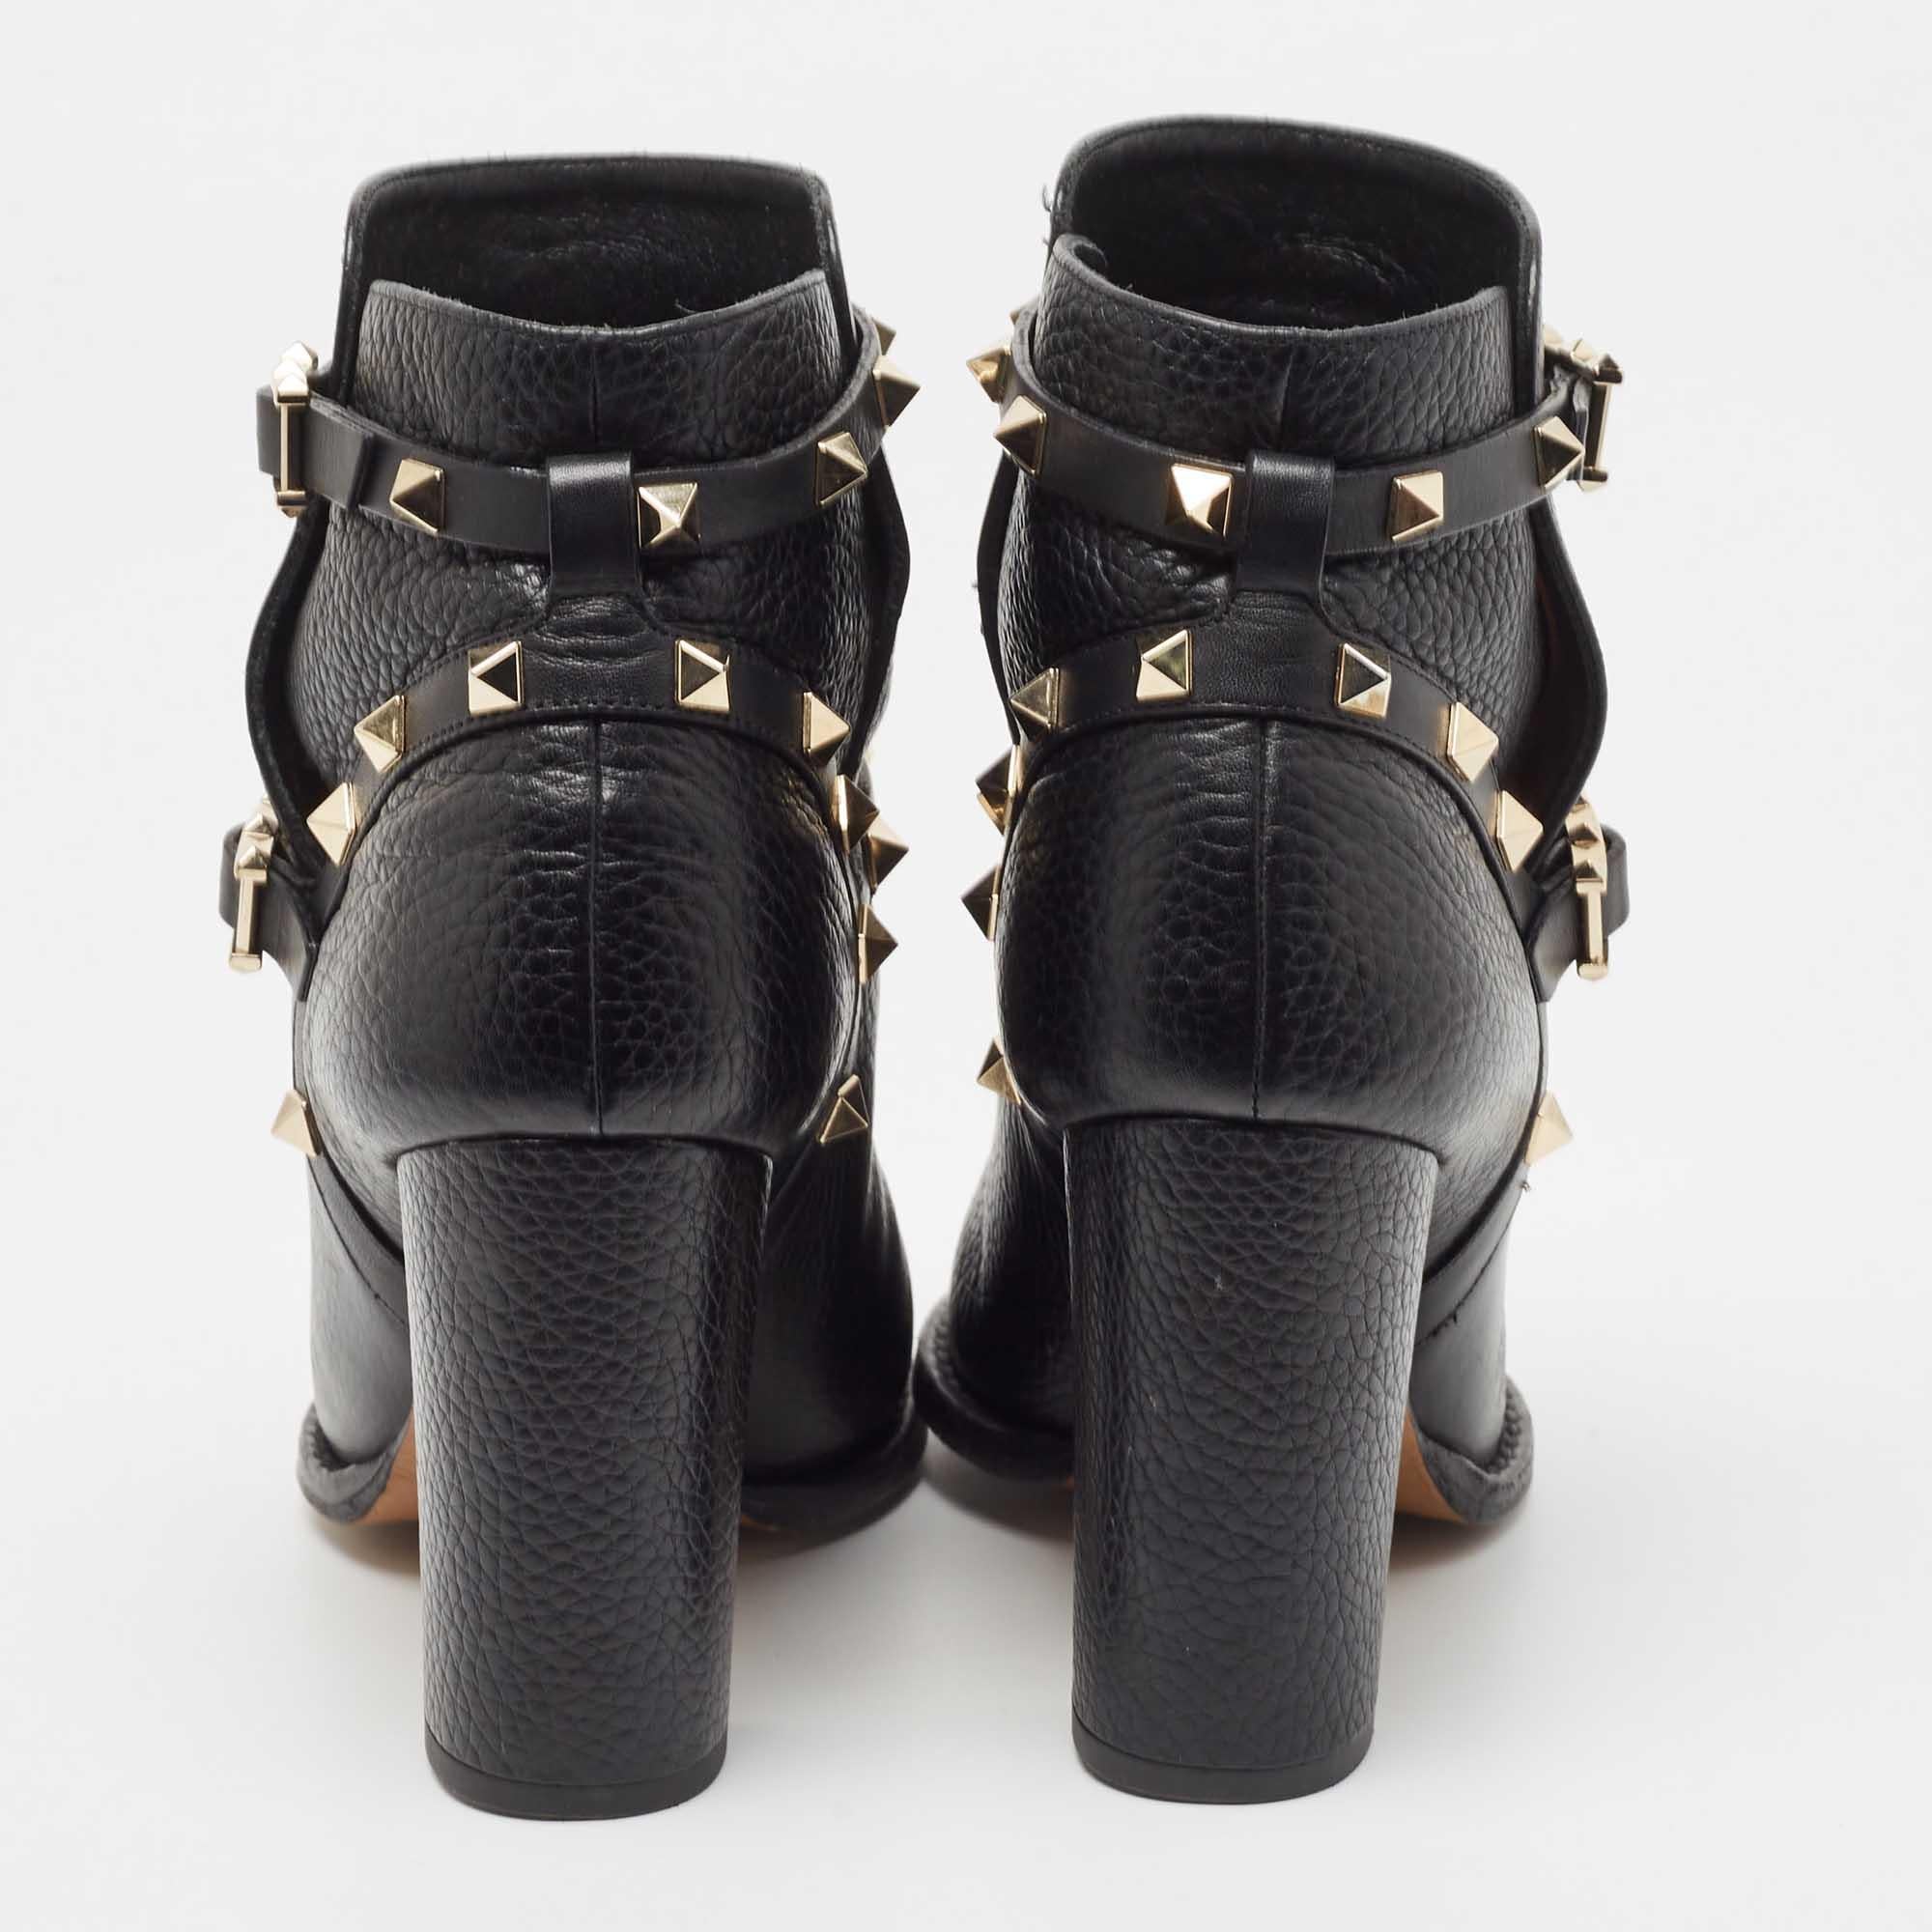 Valentino Black Leather Rockstud Ankle Boots Size 37 1